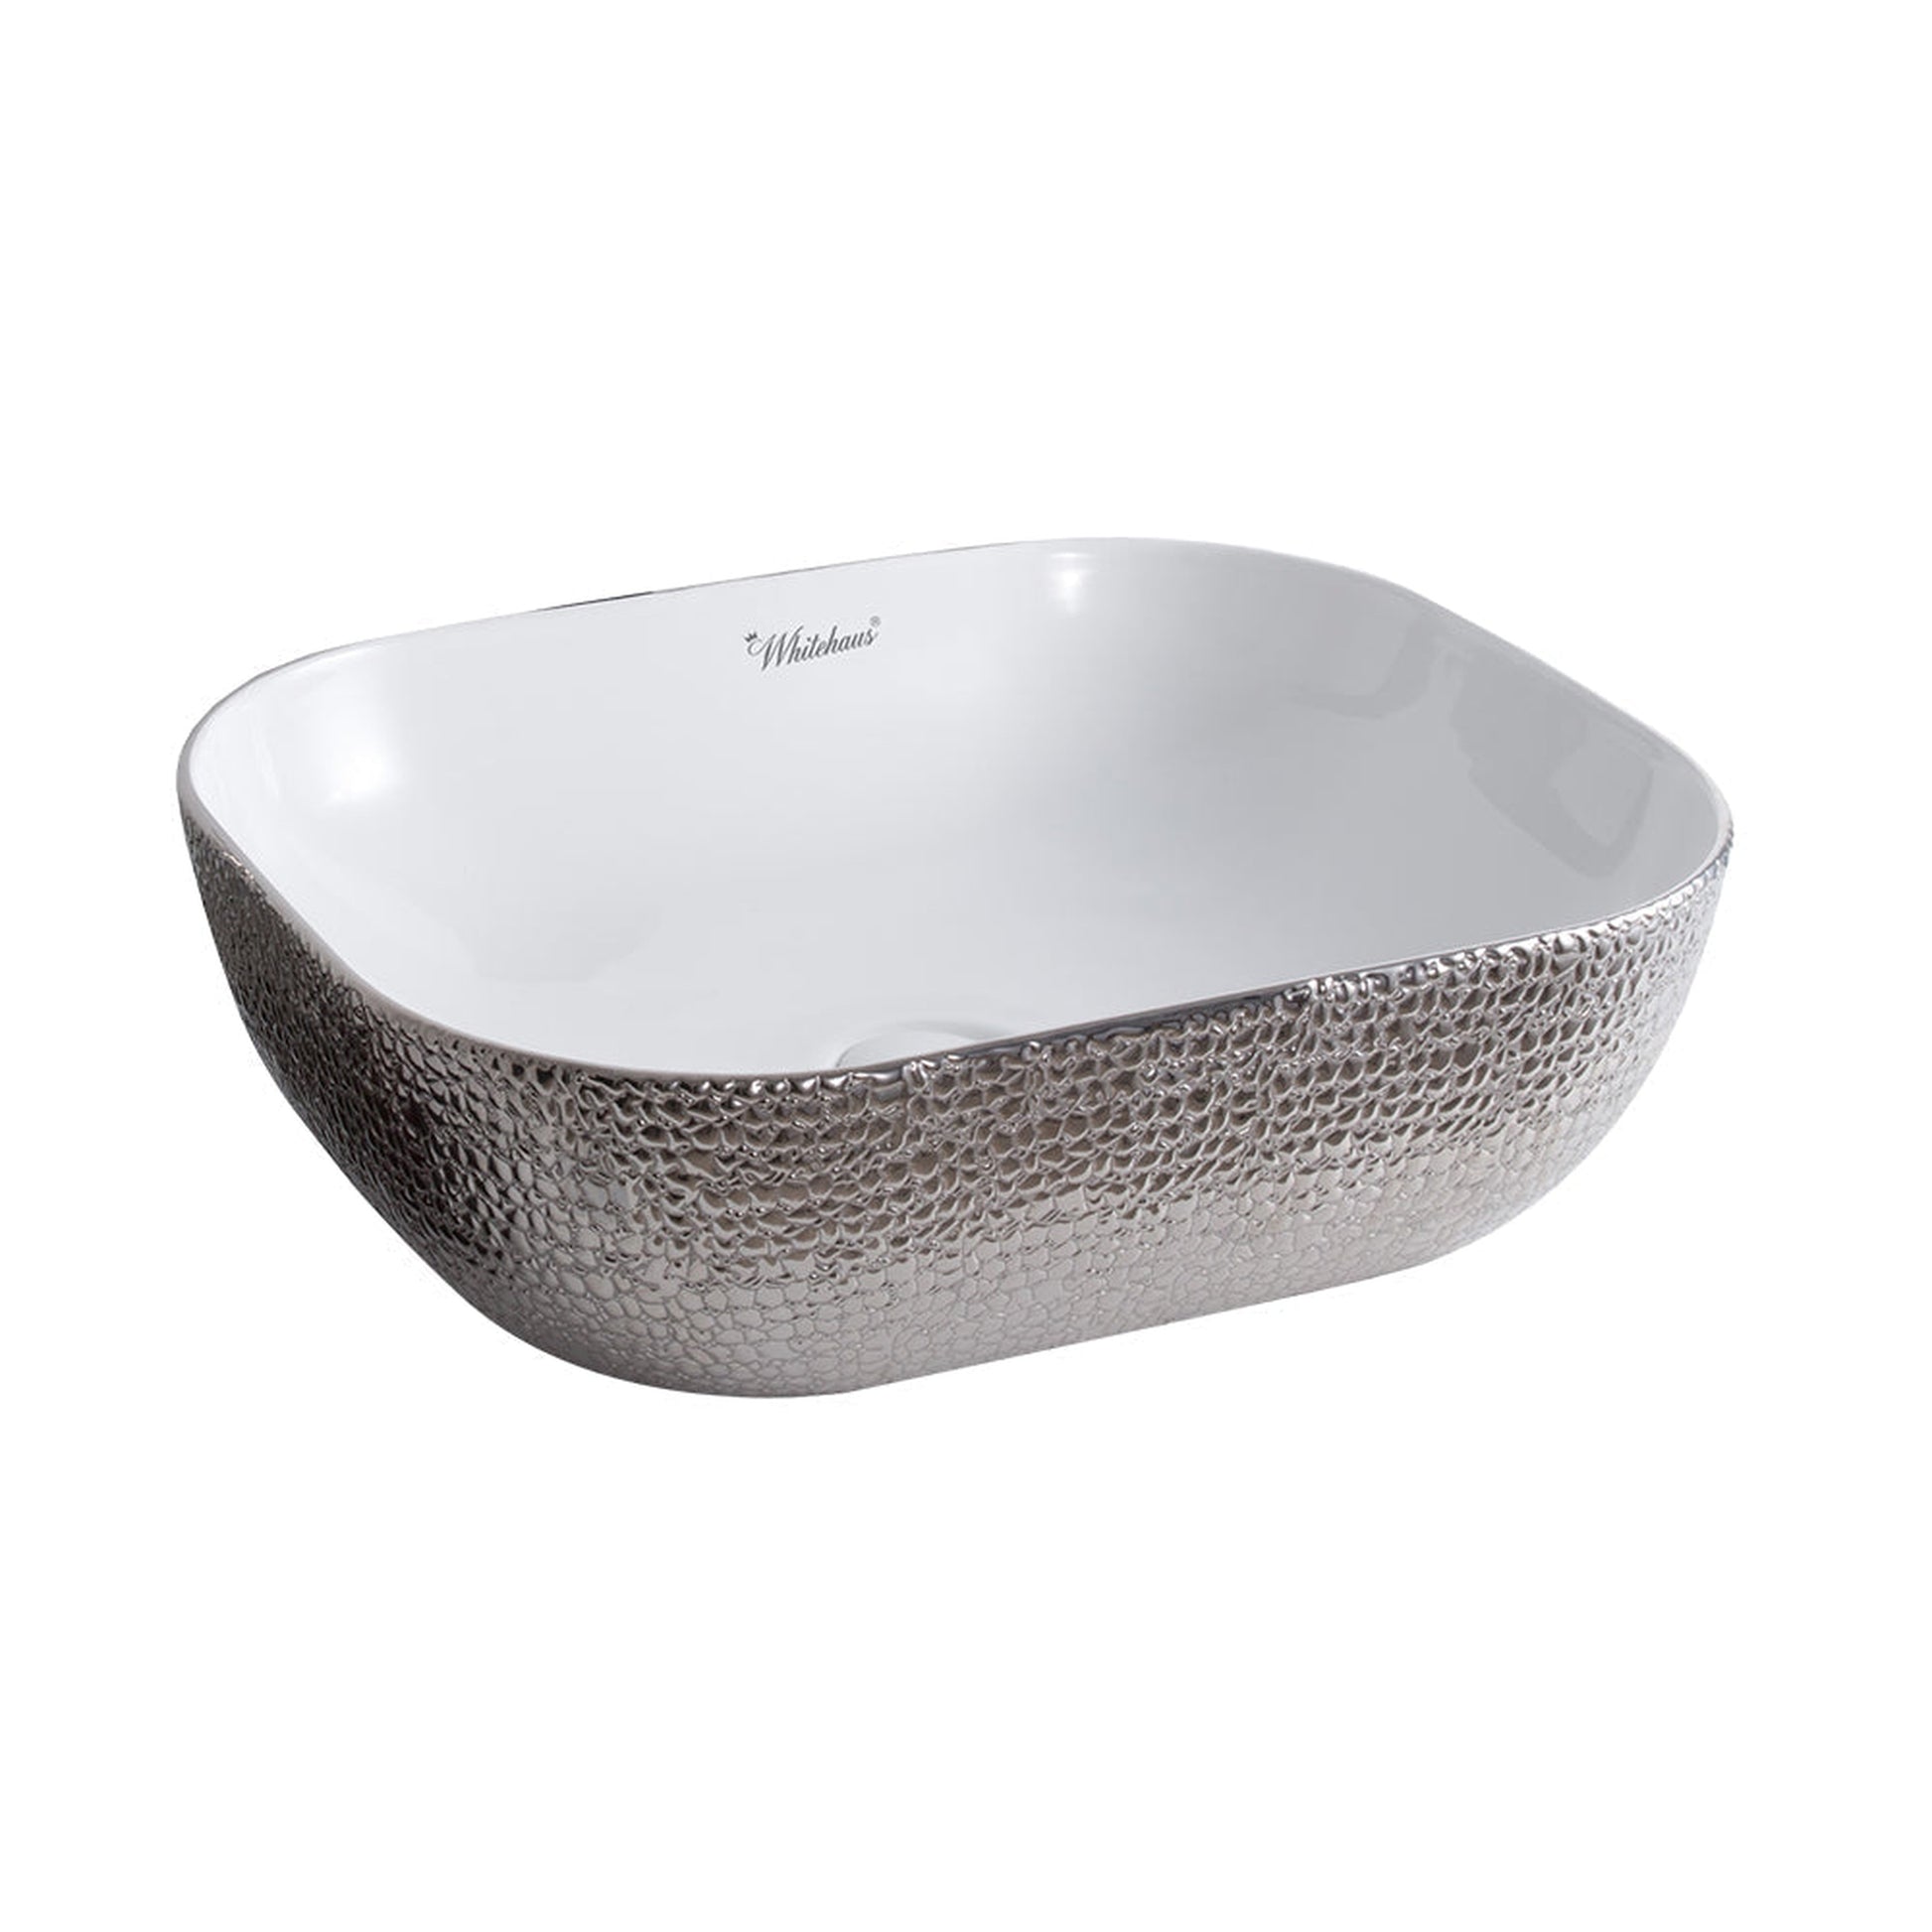 Whitehaus Isabella Plus WH71302-F21 White/Silver Rectangular Above Mount Basin With Center Drain